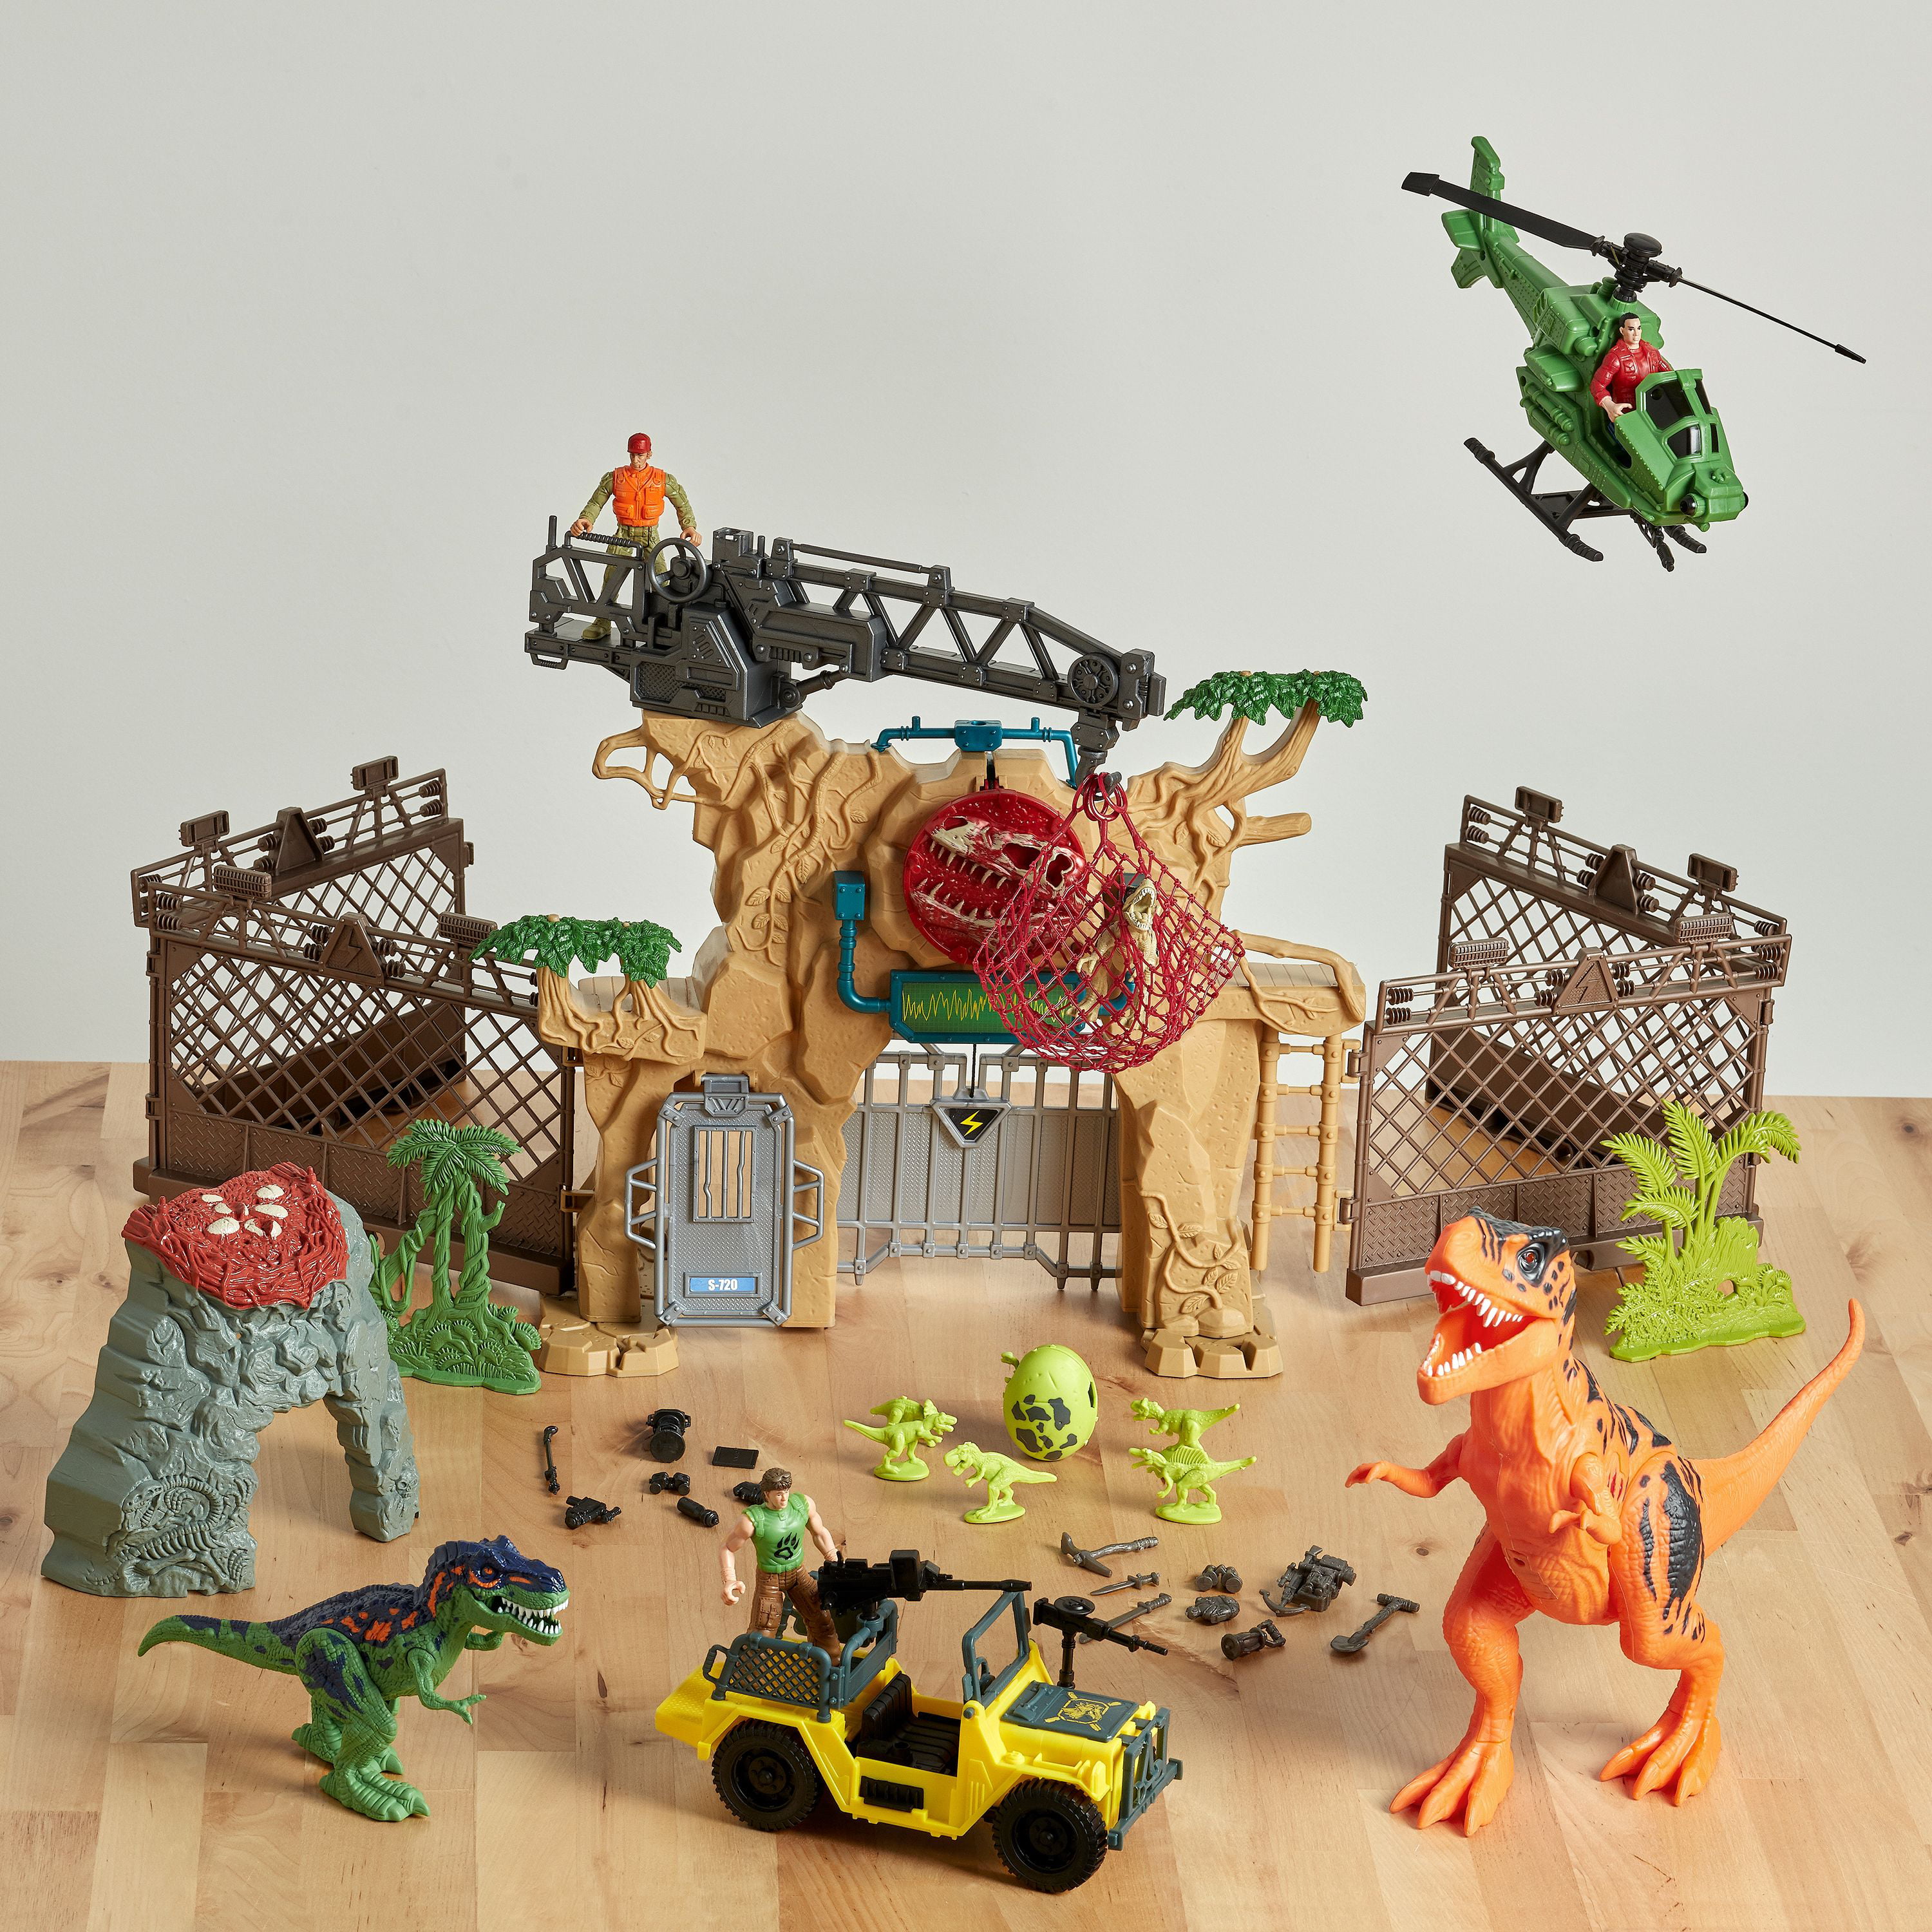 New In Box!! 46 piece Kid Connection Dinosaur Gate Play Set 